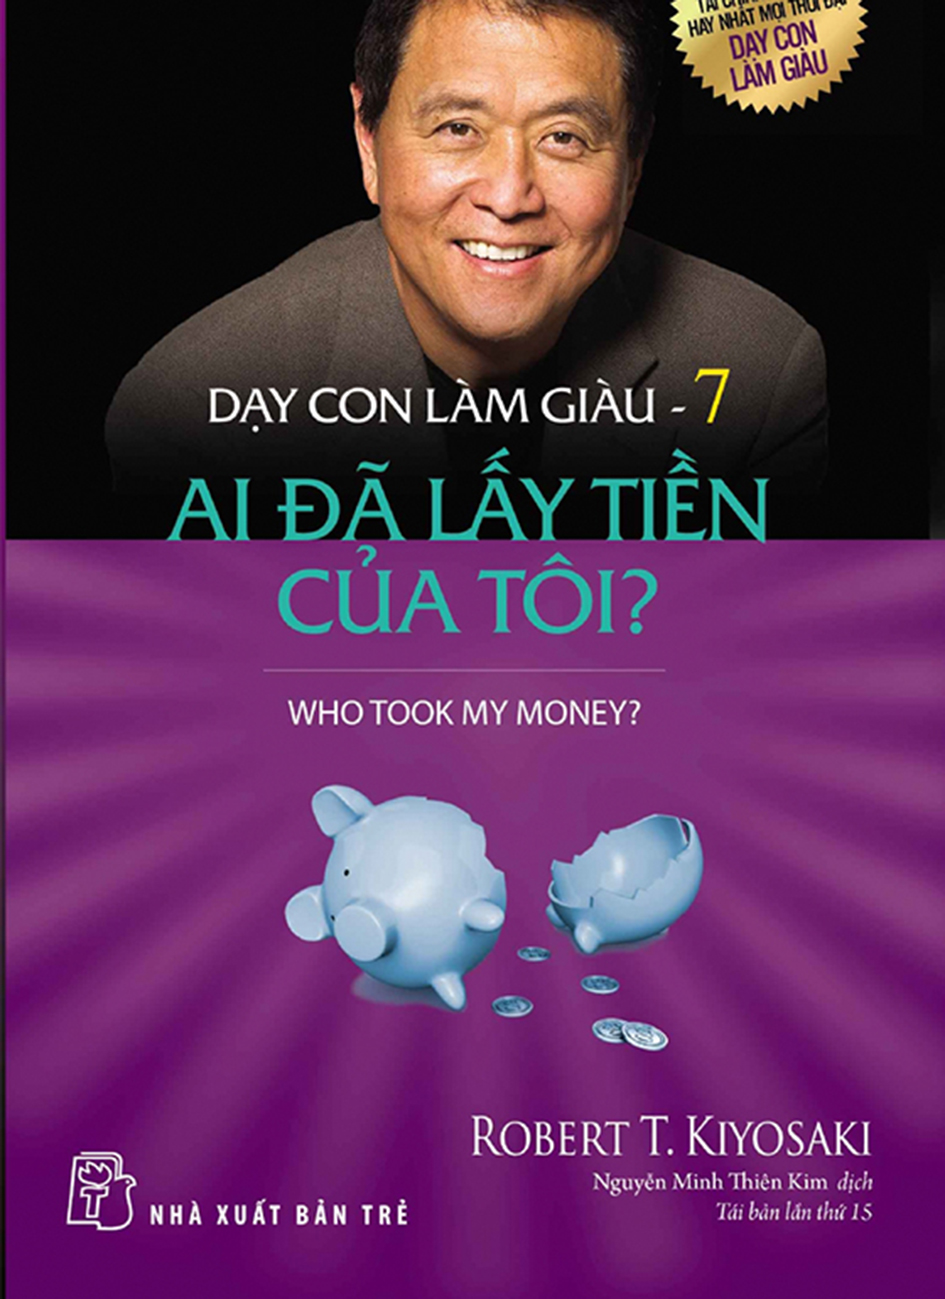 day con lam giau 7